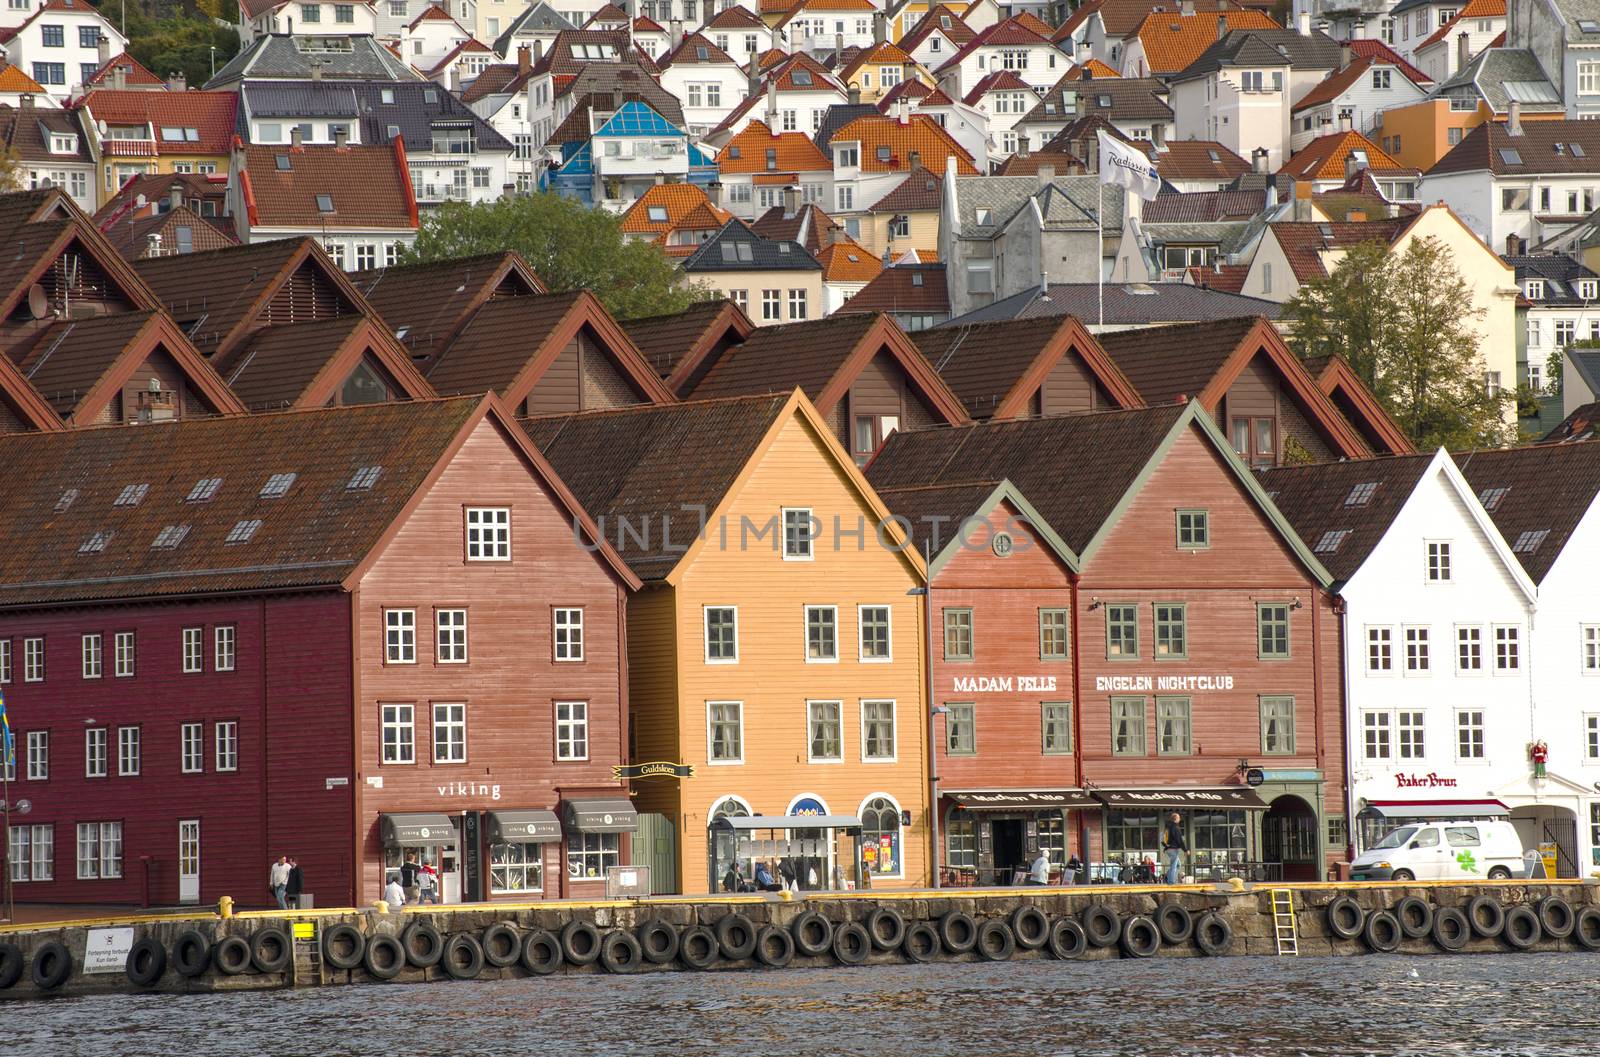 Bergen wooden houses by Alenmax